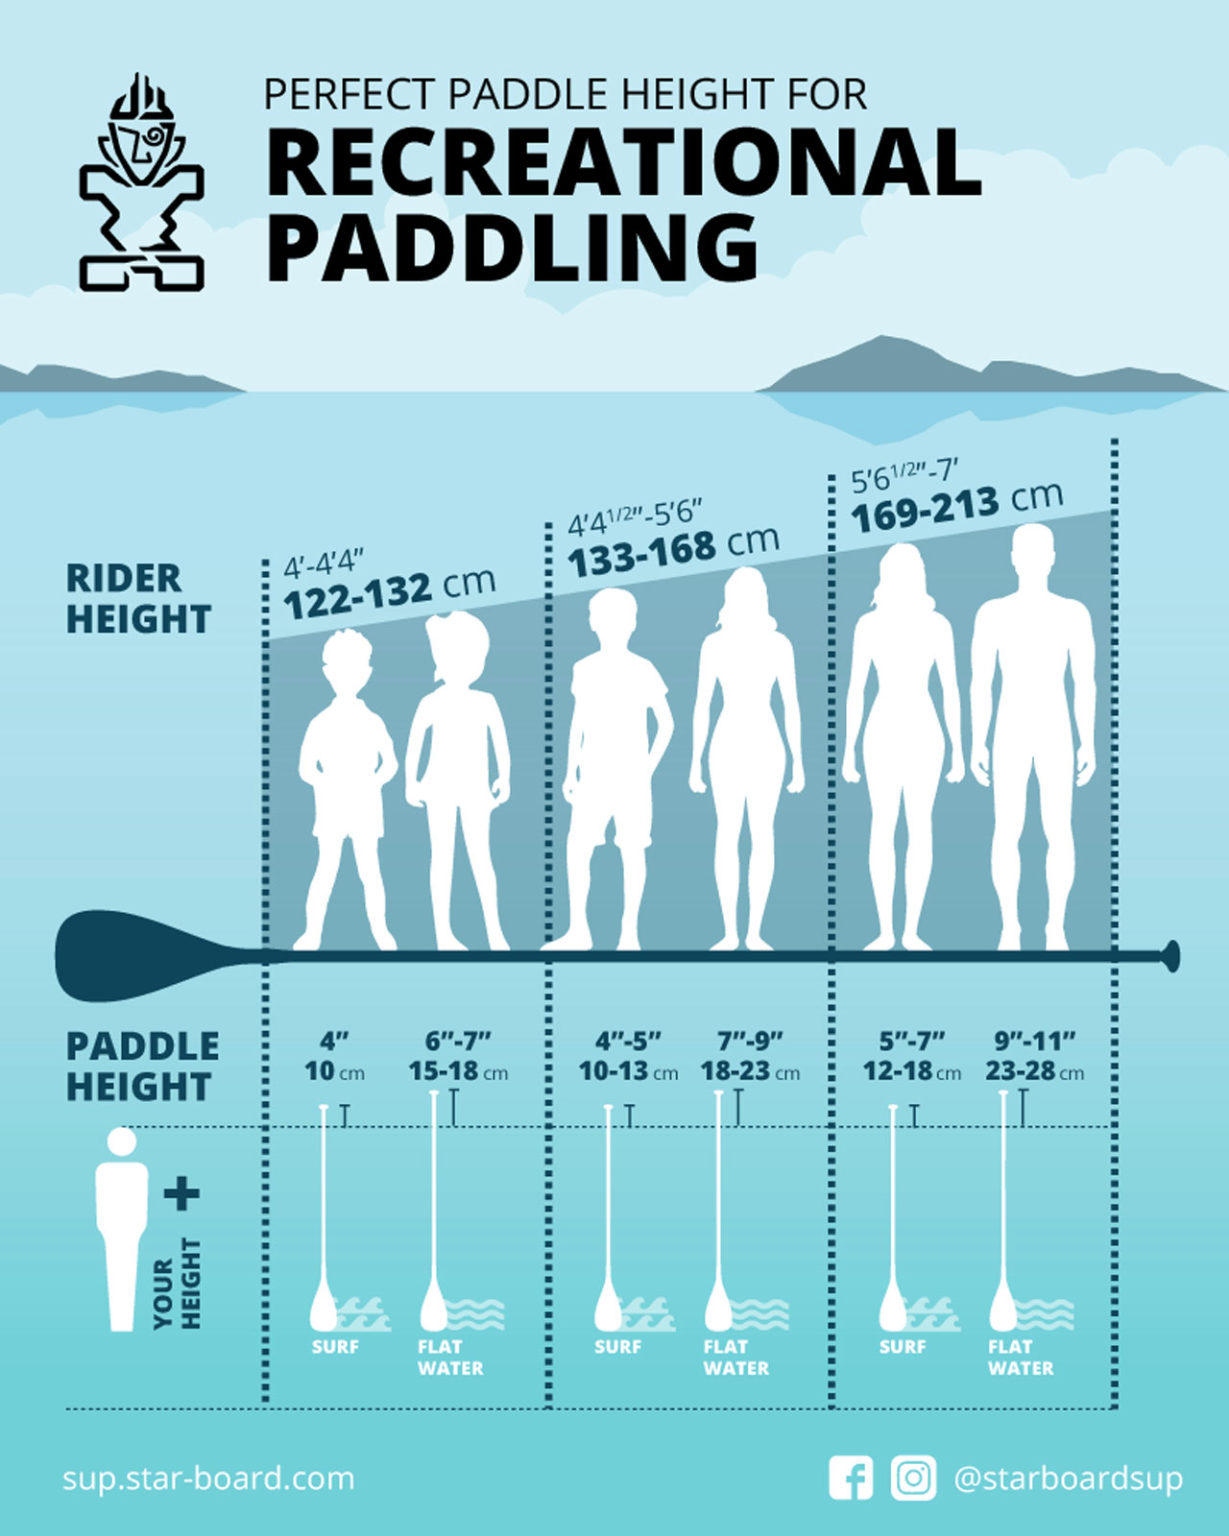 Starboard Paddle Setup Chart: How To Set SUP Paddle Height » Starboard SUP